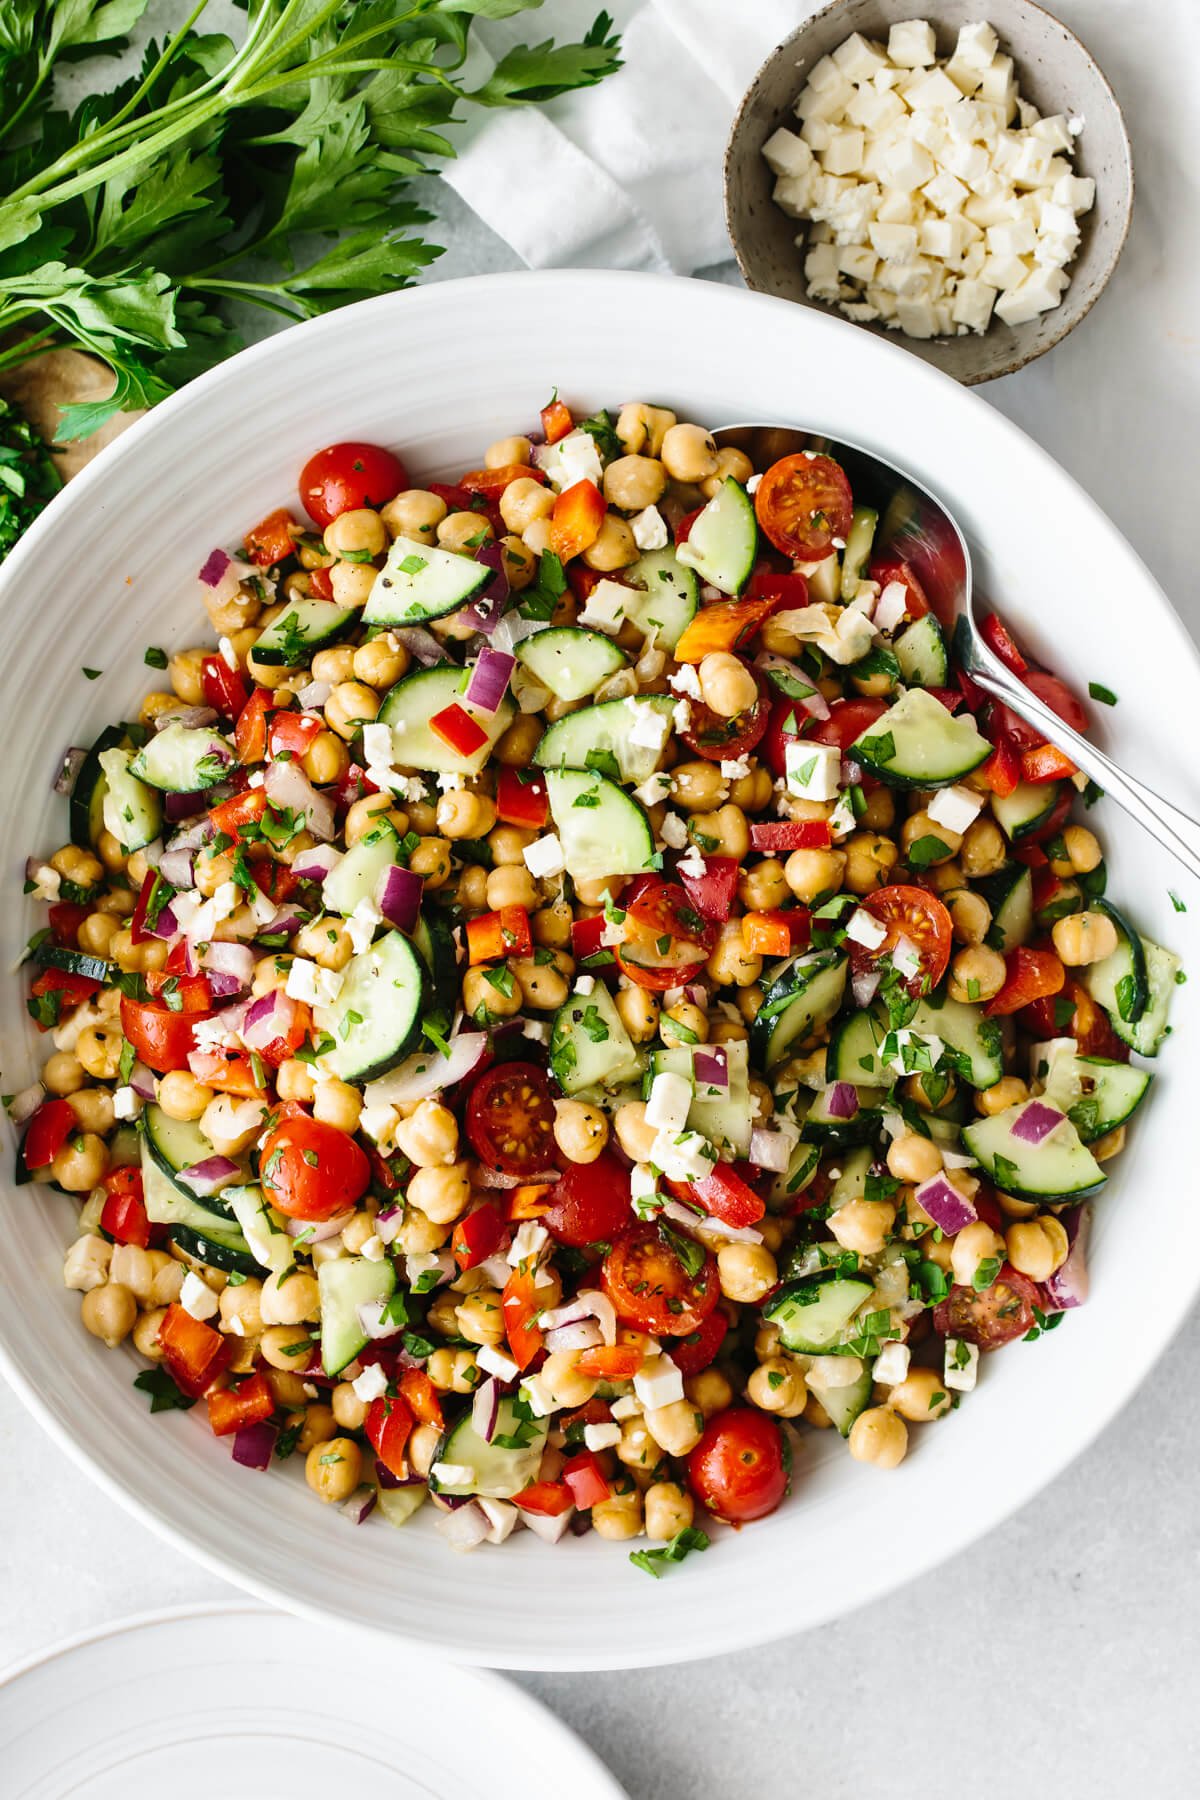 Mediterranean chickpea salad in a large white bowl on a table.